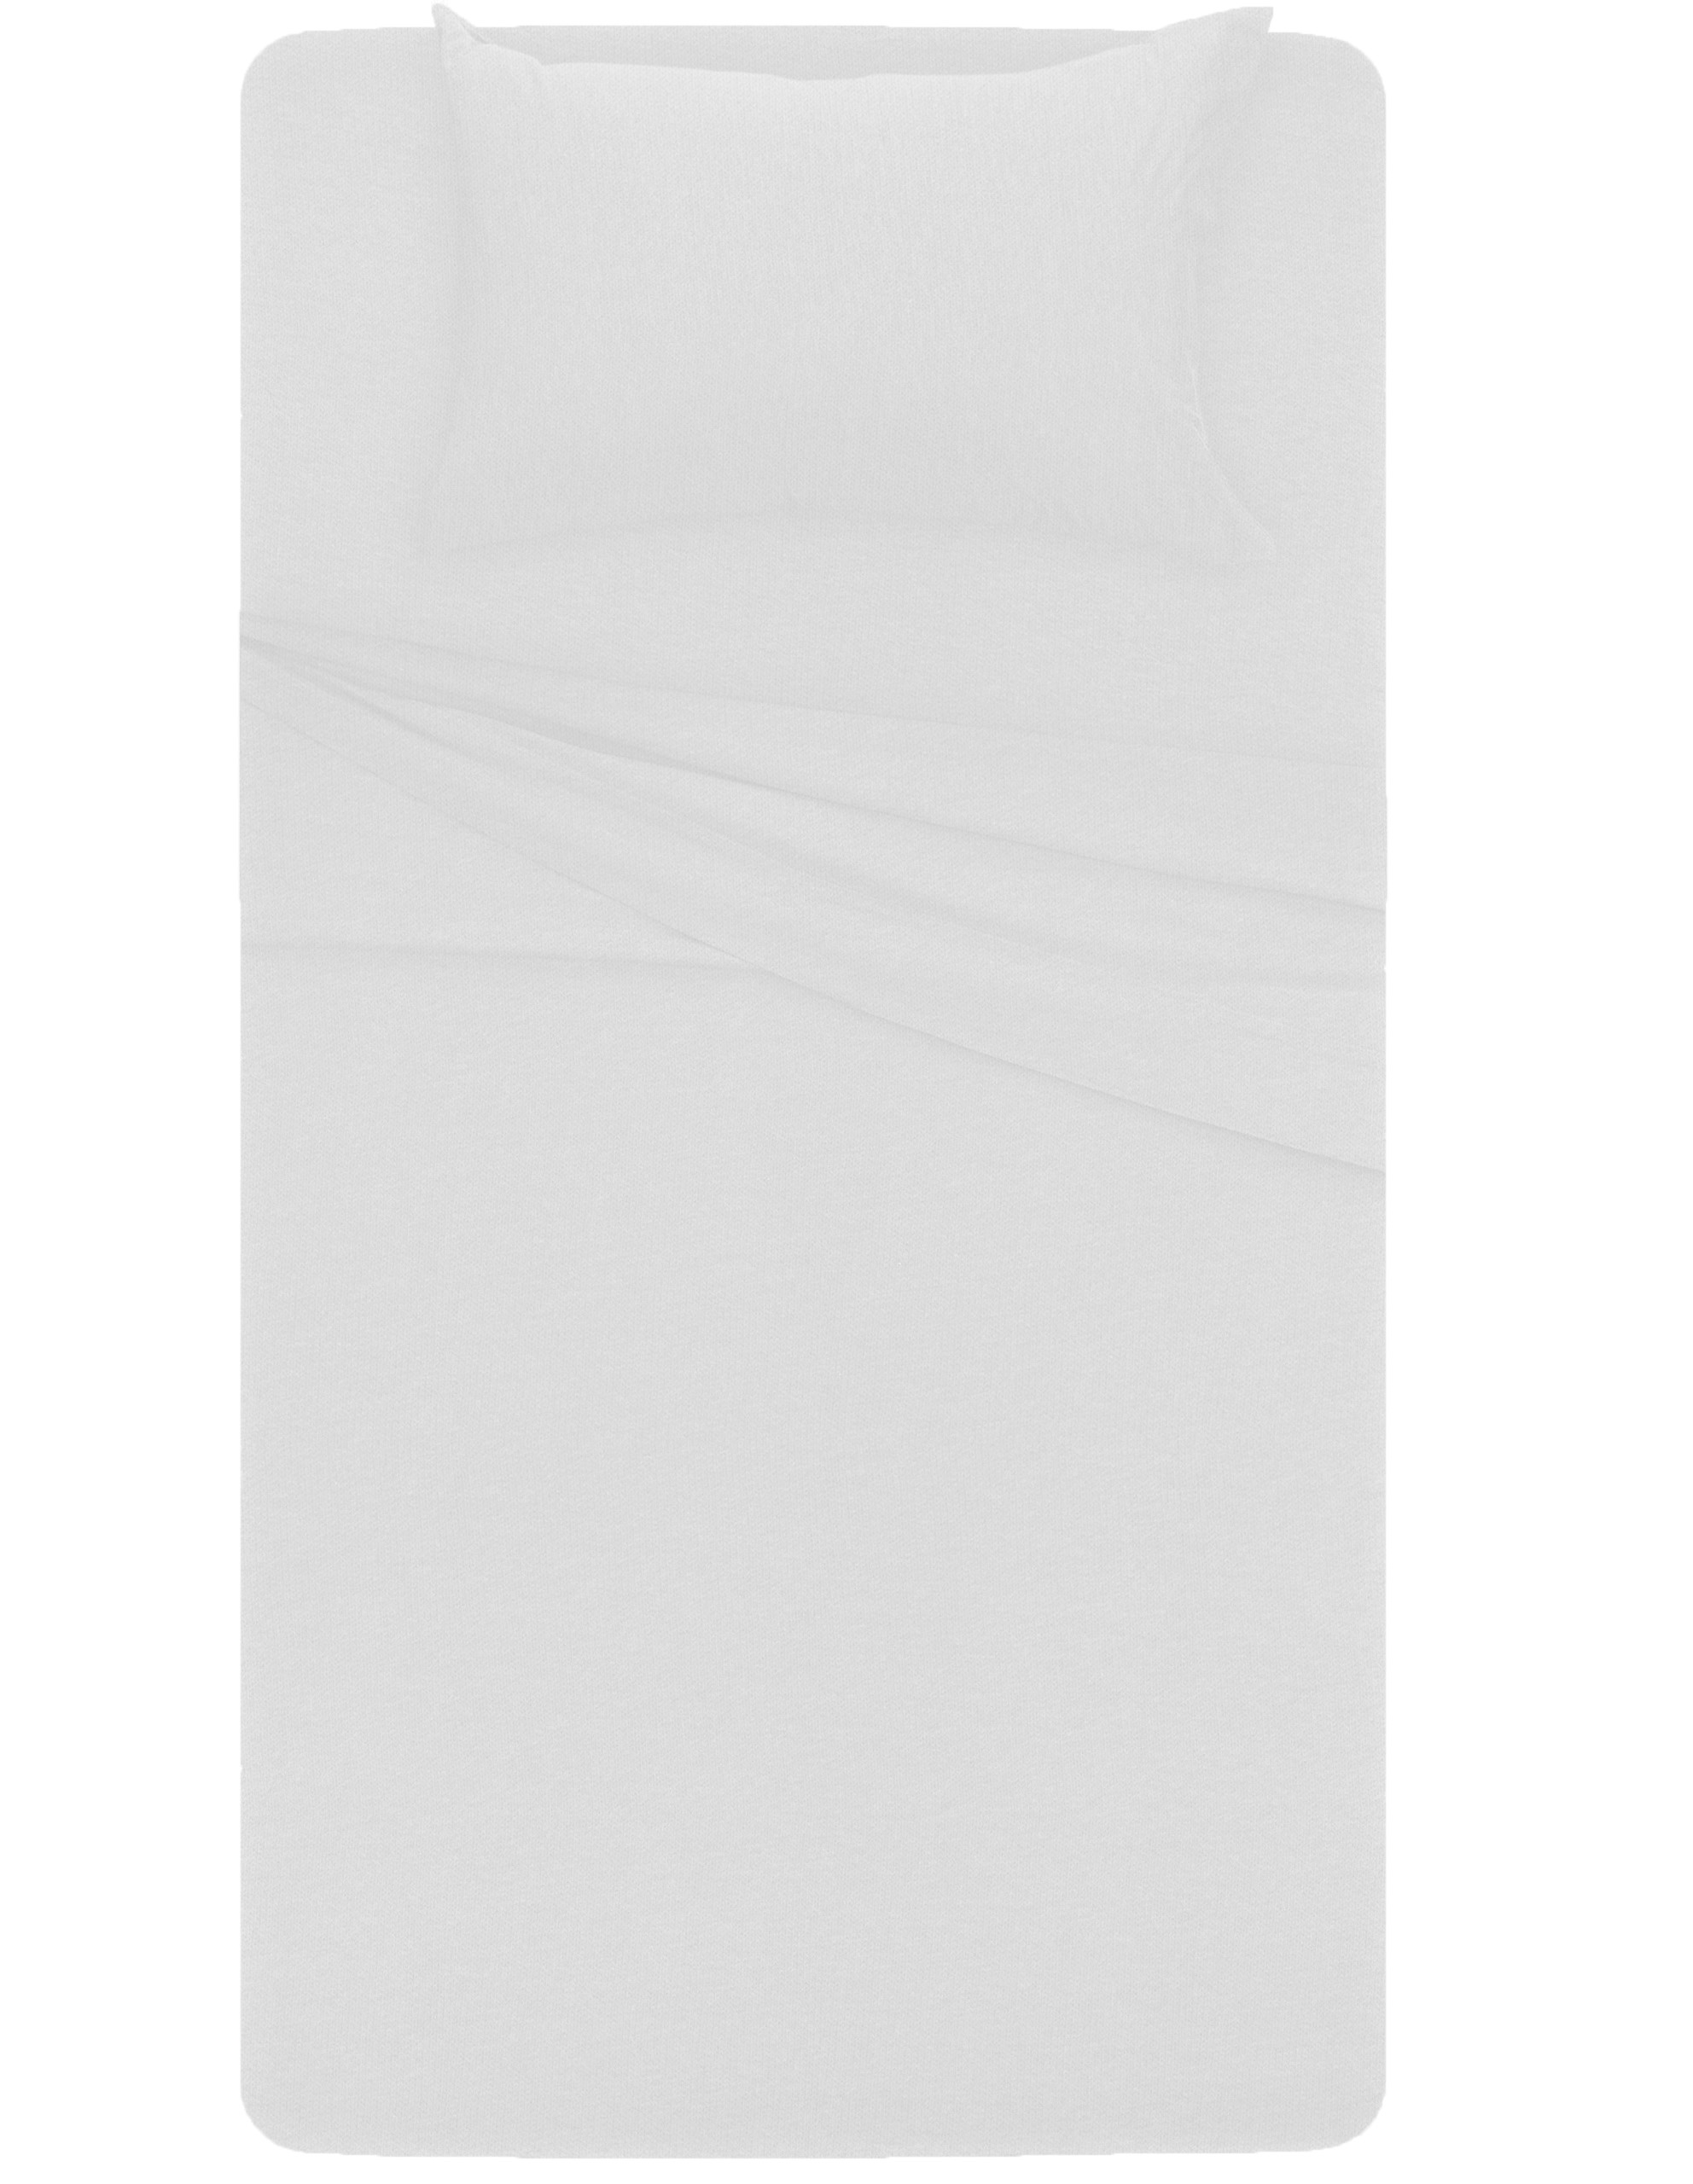 Soft Tees Luxury Cotton Modal Ultra Soft Jersey Knit Sheet Set by Royale Linens - image 5 of 10